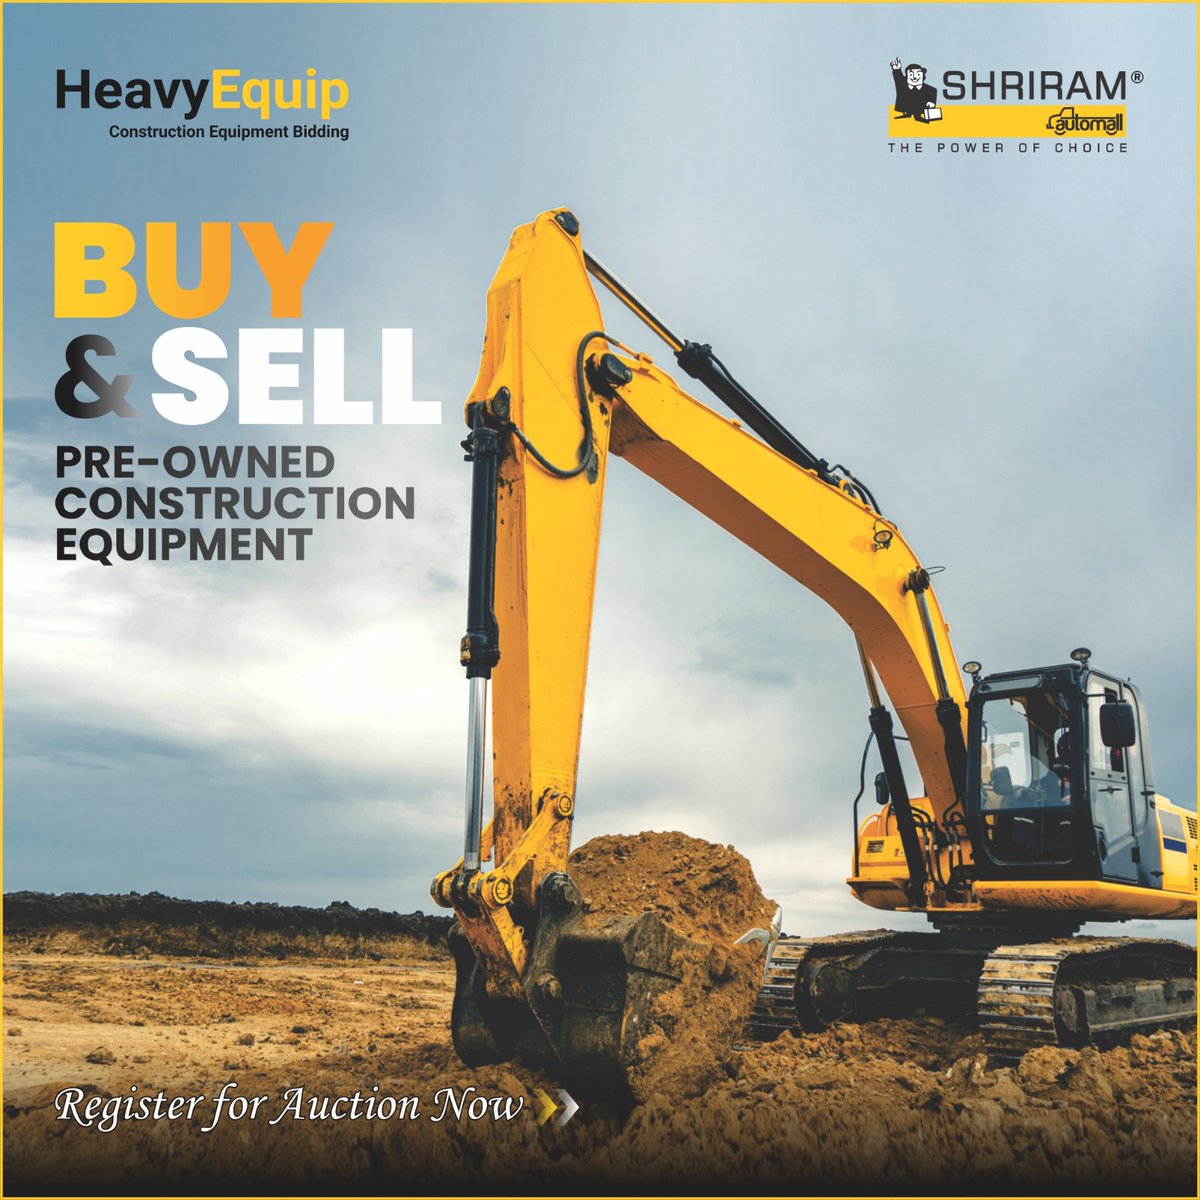 Buy the Used Construction Equipment of Your Choice.

Registered Now: l.samil.in/46P9Osps

#UsedVehicles #UsedEquipment #PhysicalAuction #Construction #ConstructionVehicles #BuyNow #Sell #Samil #ShriramAutomall #ProudSamilian